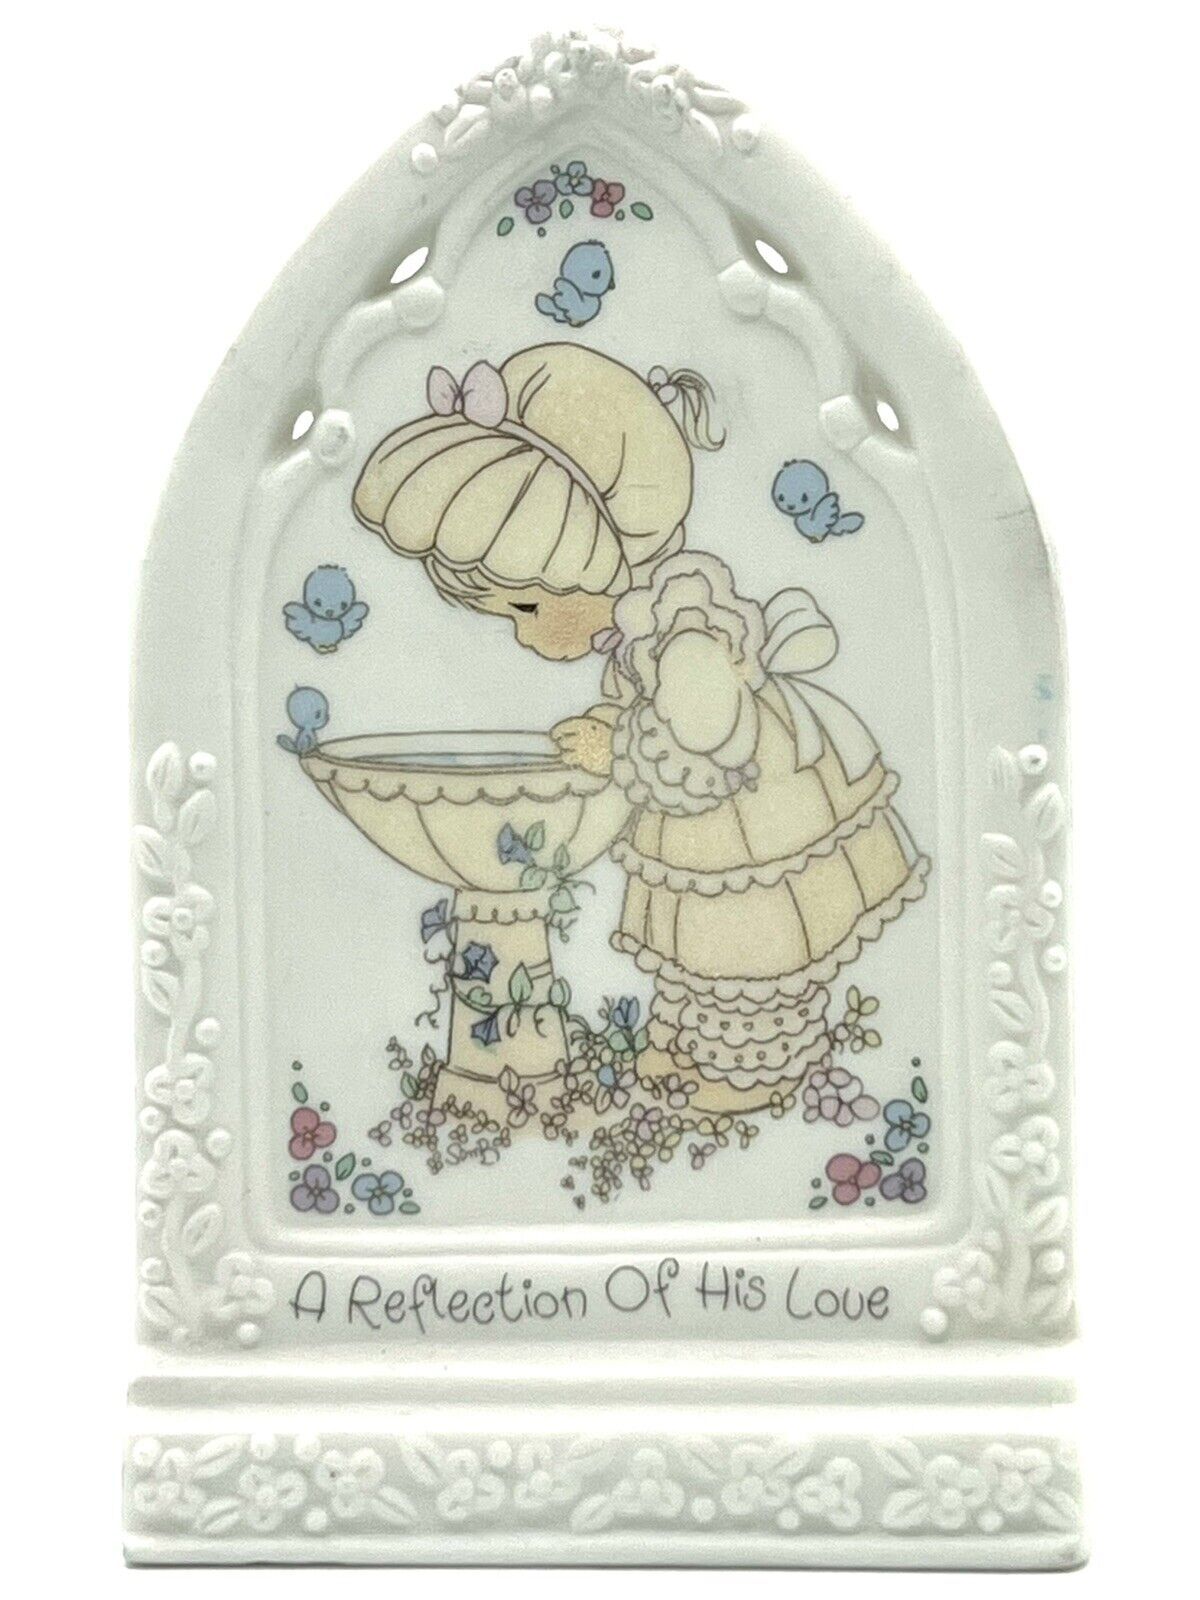 Primary image for Precious Moments 1993 "A Reflection Of His Love" Kindness Standing Plaque